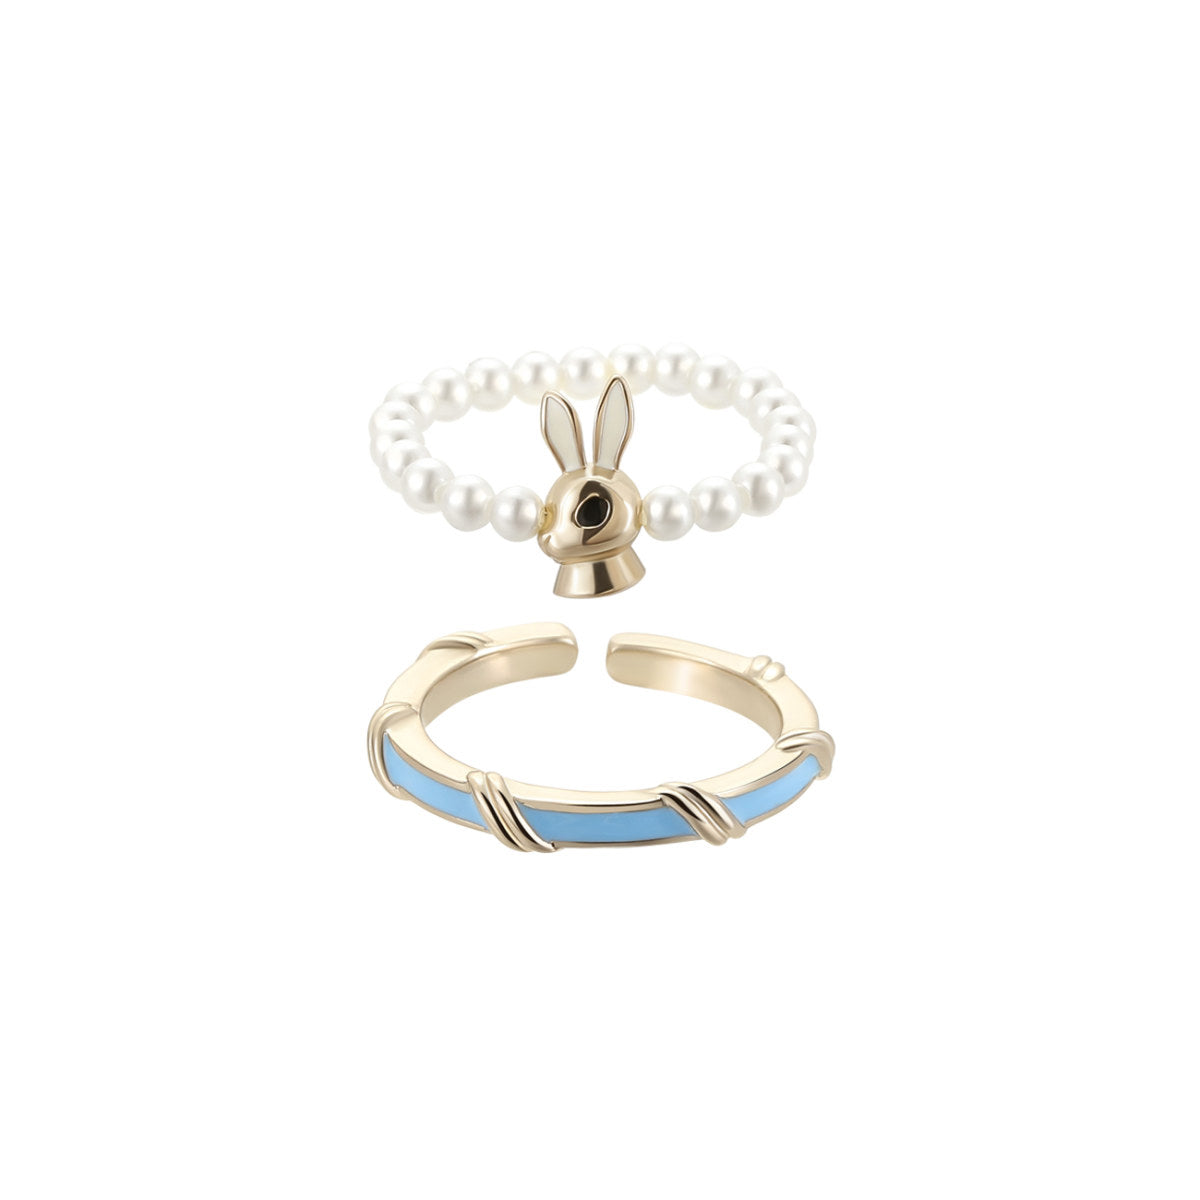 Lost Bunny Blue Ring Set